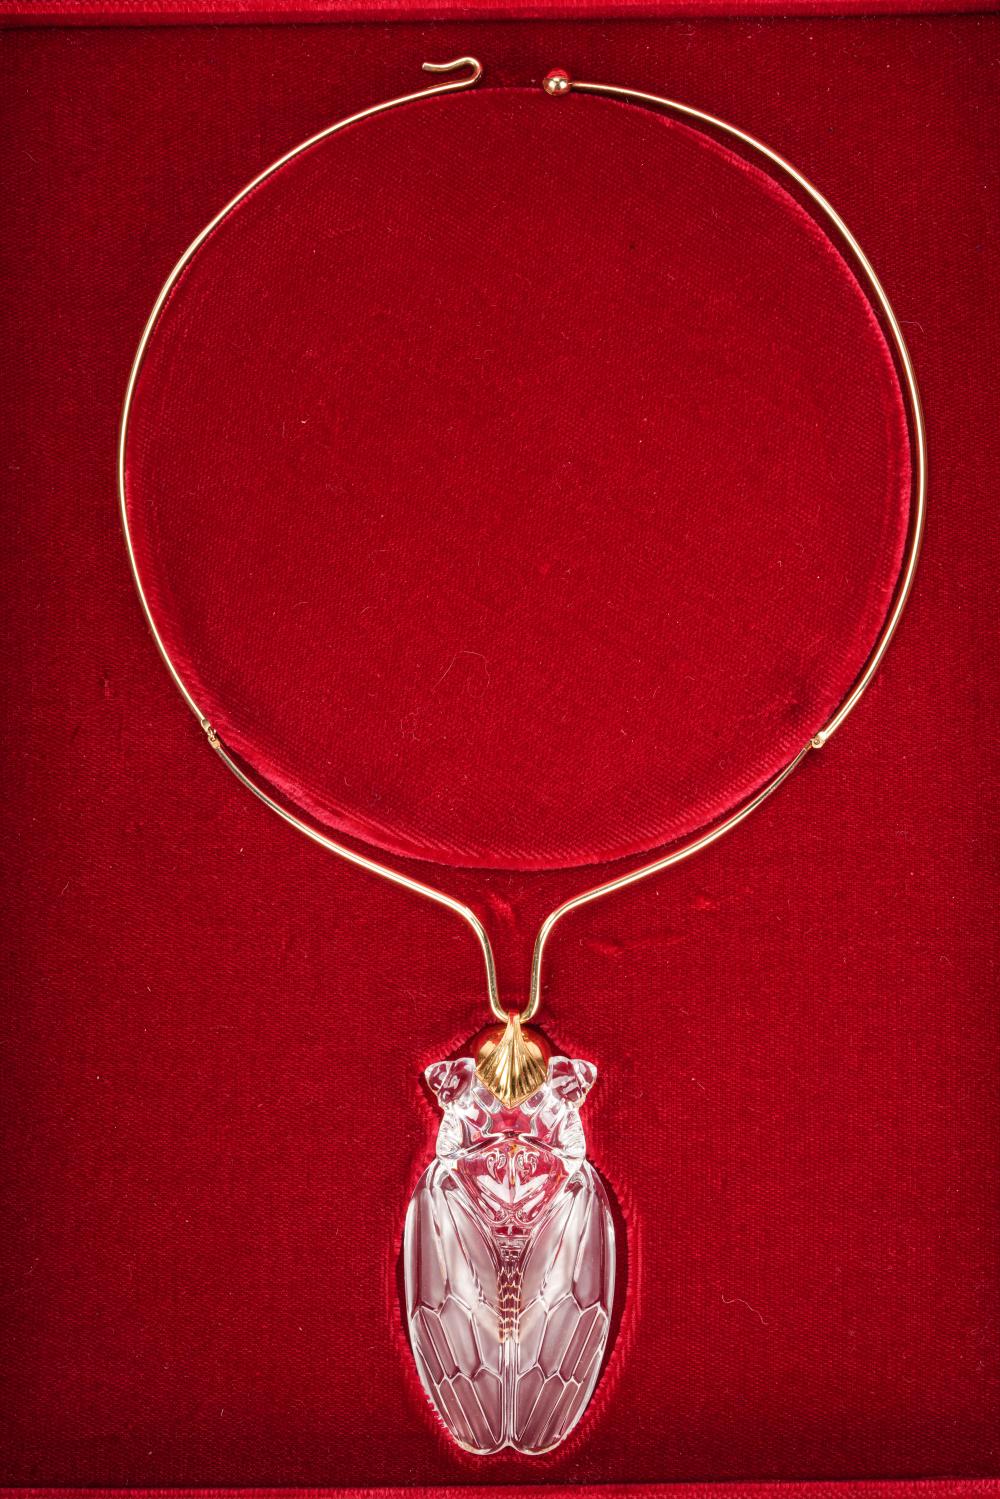 STUEBEN YELLOW GOLD GLASS NECKLACE18 331b14